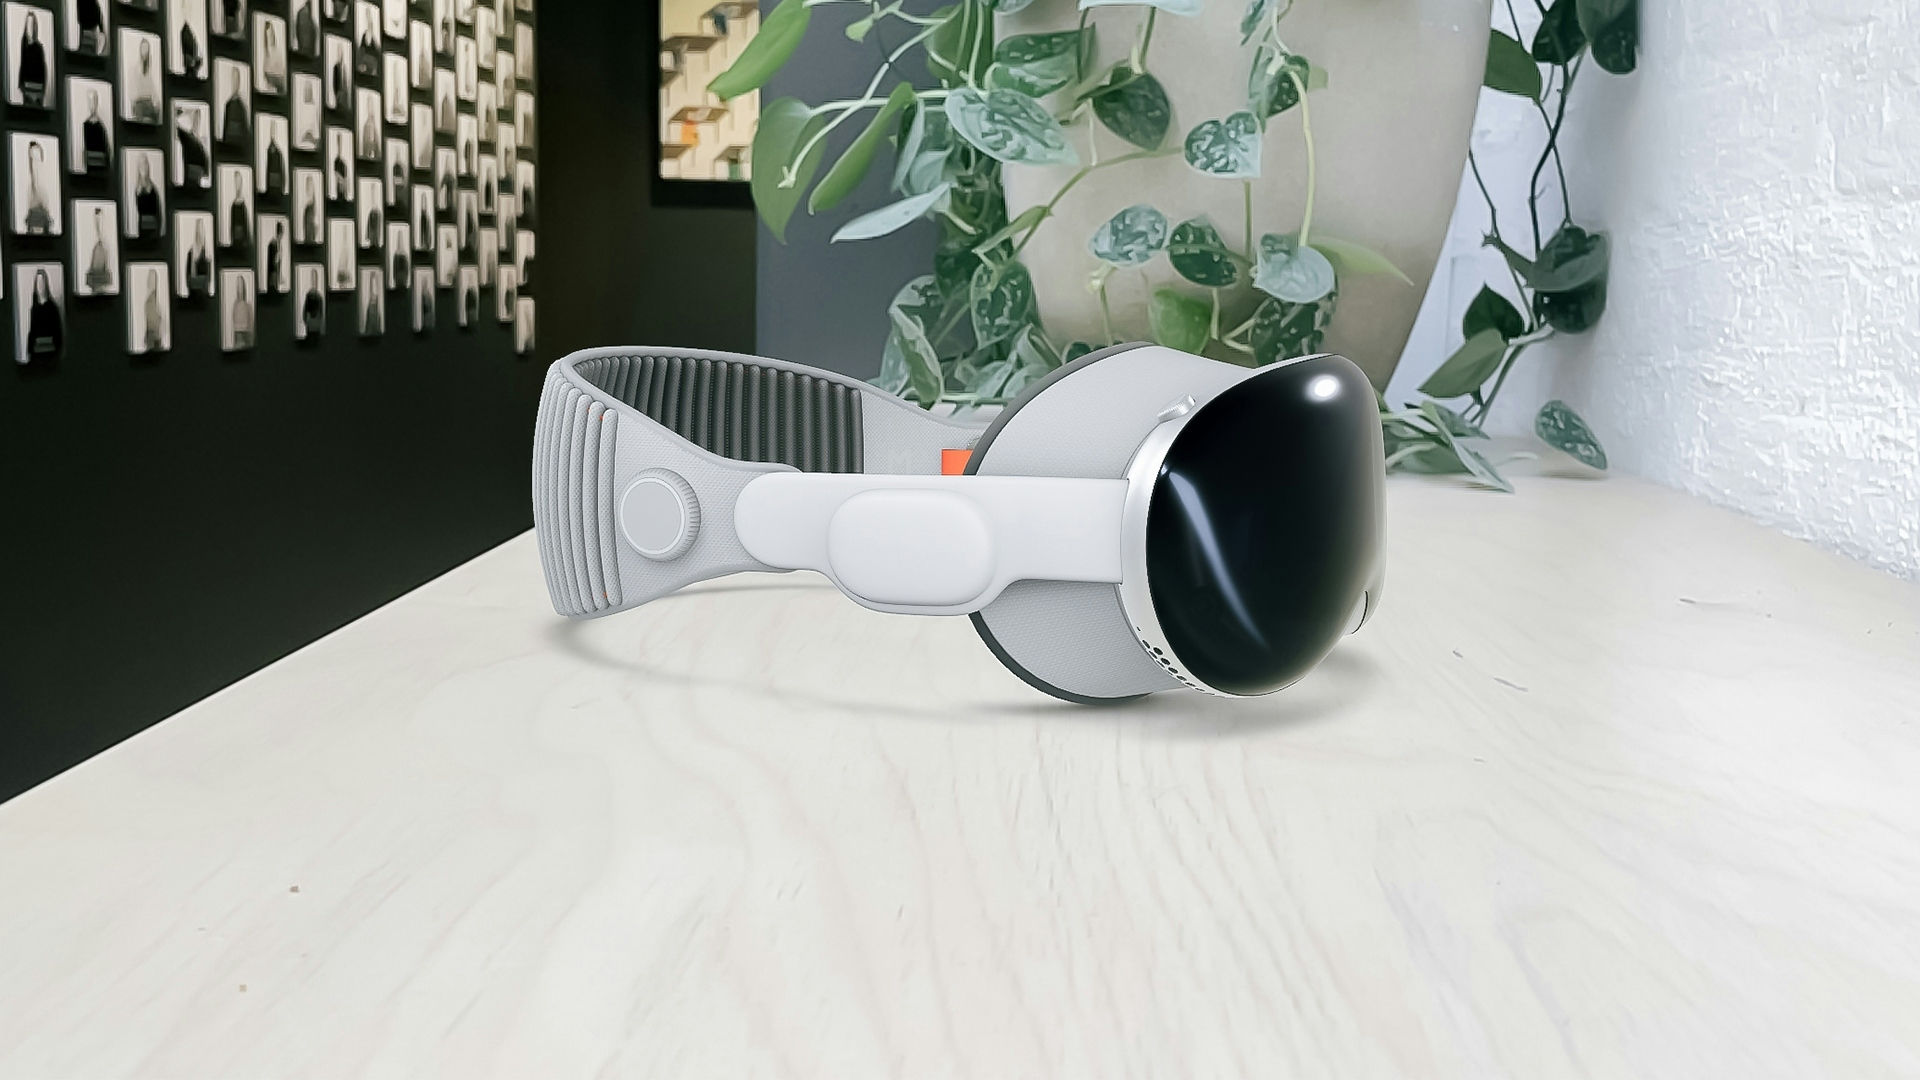 An Apple Vision Pro device placed on a wooden surface. A plant and dark wall with photos showing in the background. Photo and render.